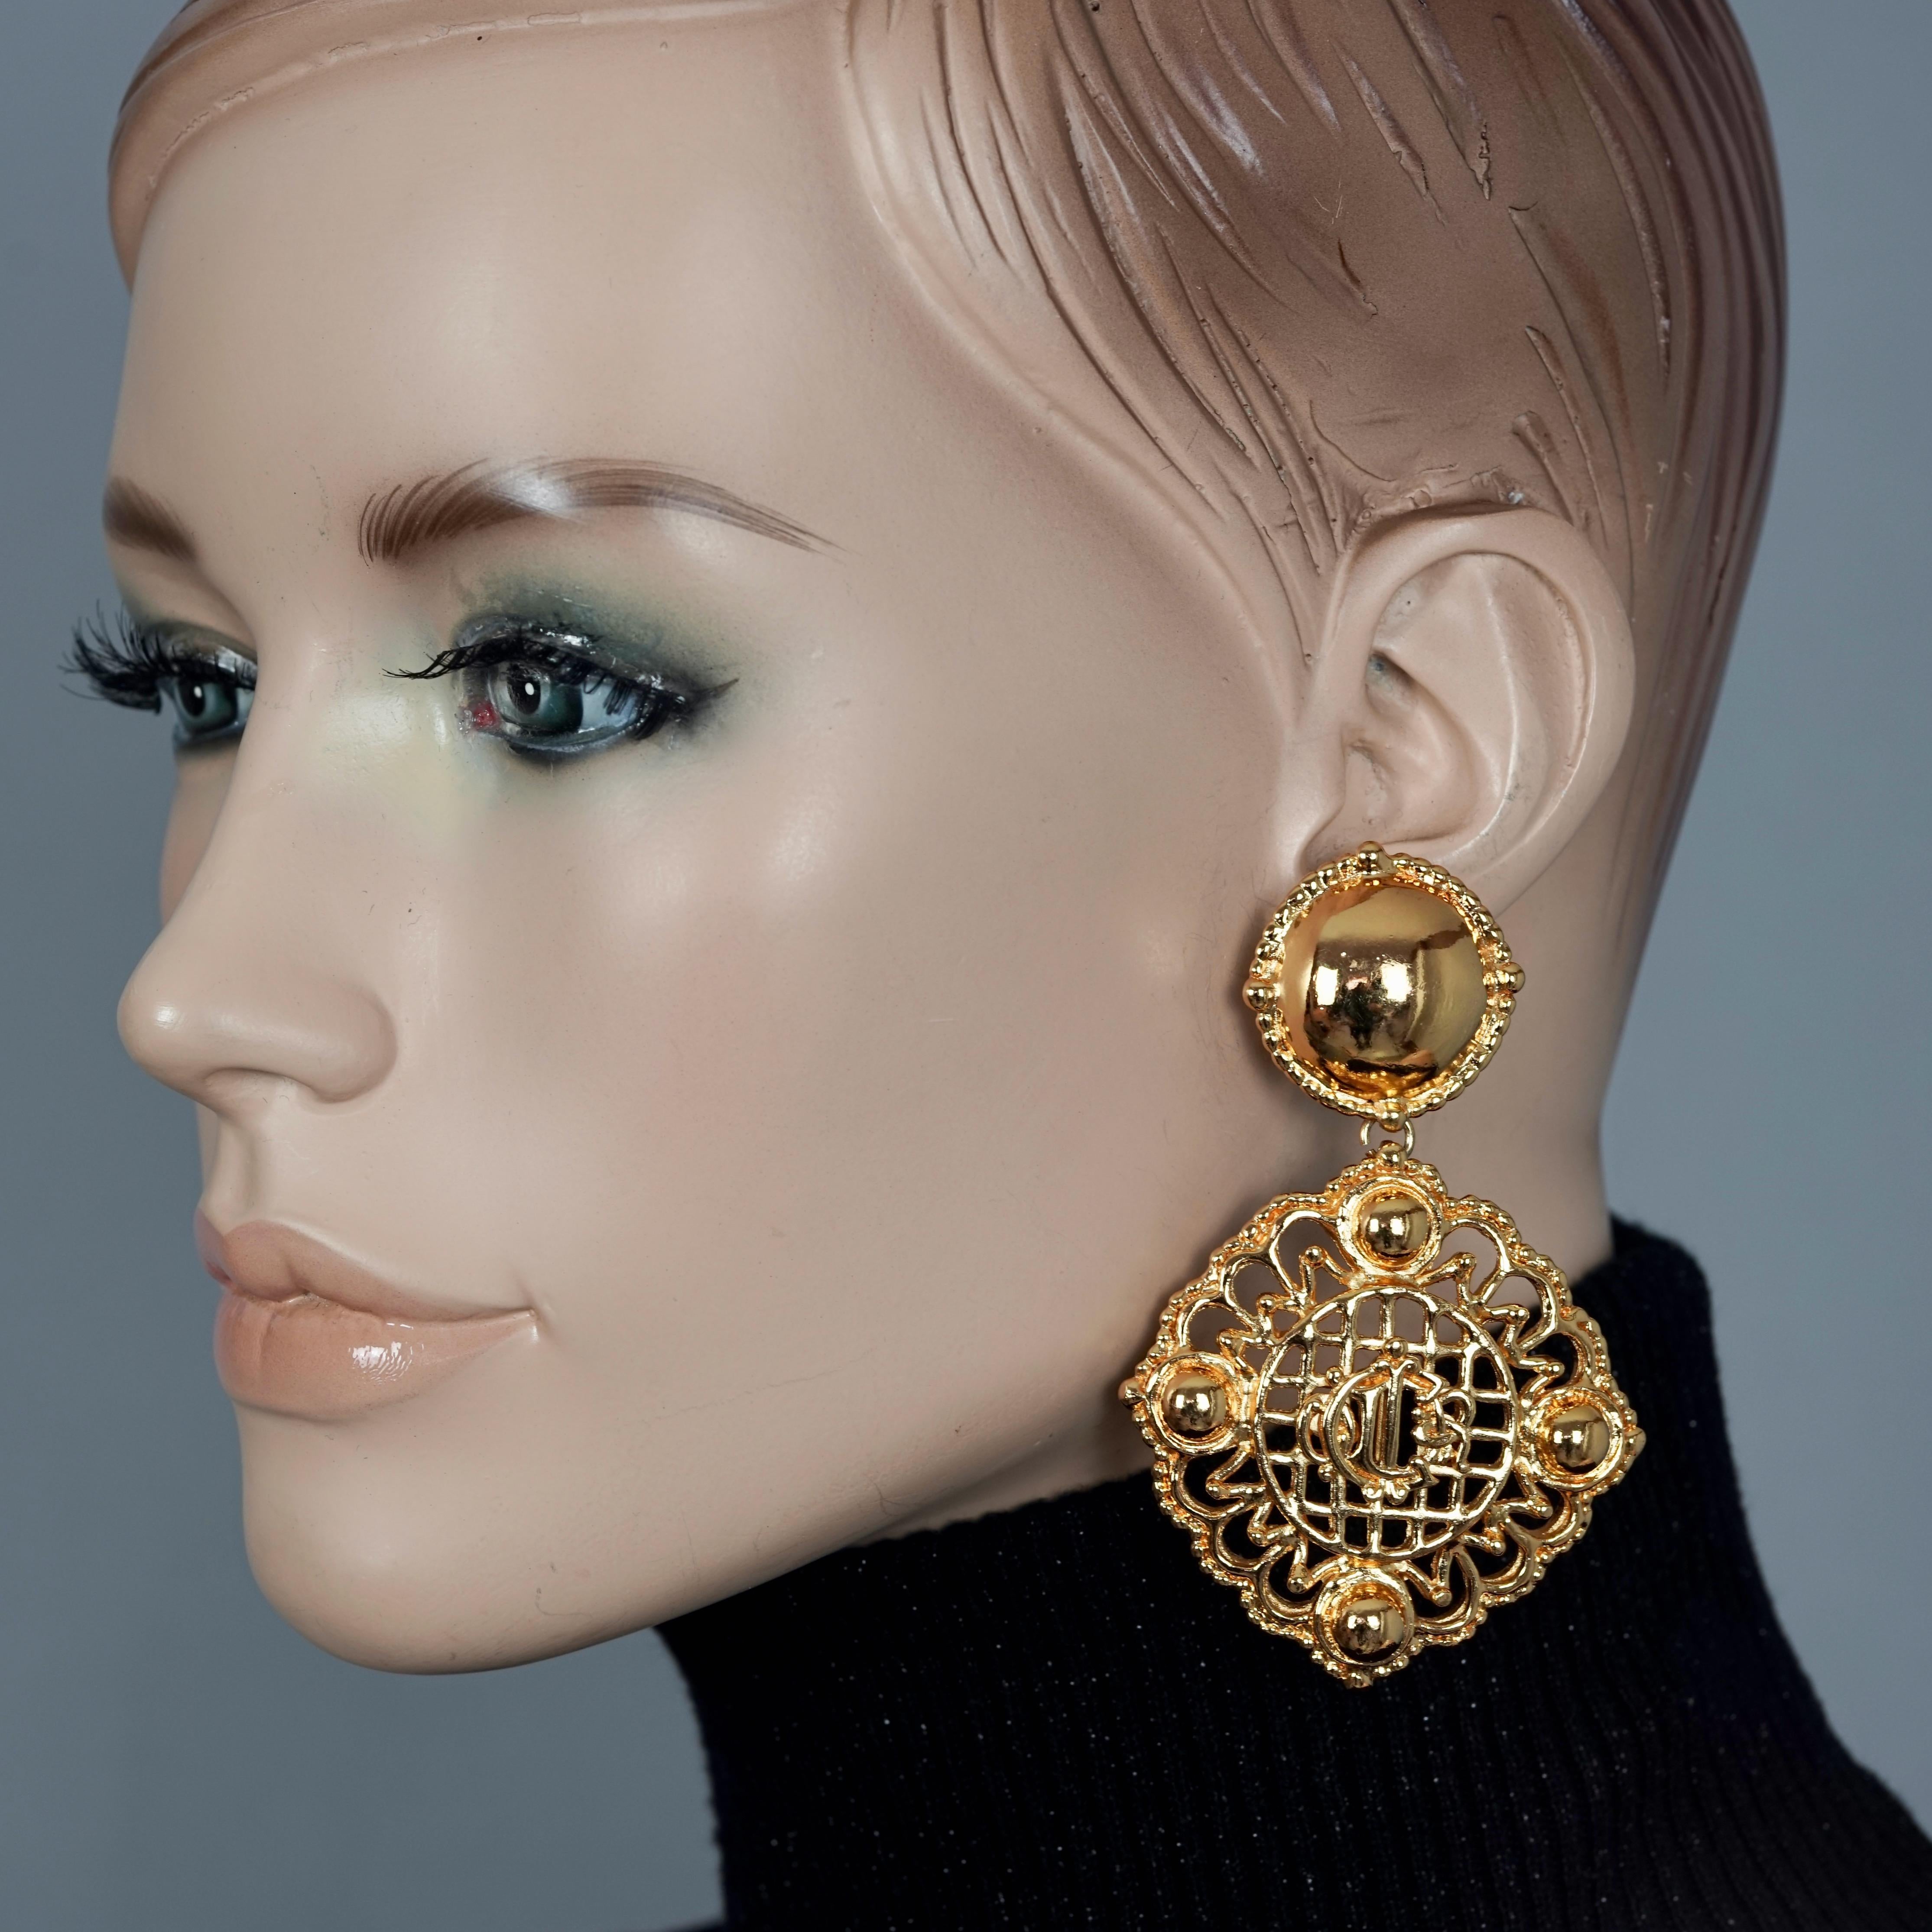 Vintage CHRISTIAN DIOR Logo Insignia Mesh Dangling Earrings

MEASUREMENTS:
Height: 3.15 inches (8 cm) 
Width: 1.96 inches (5 cm) 
Weight per Earring: 33 grams

FEATURES:
- 100% Authentic CHRISTIAN DIOR.
- Dior insignia/ logo dangling earrings.
-